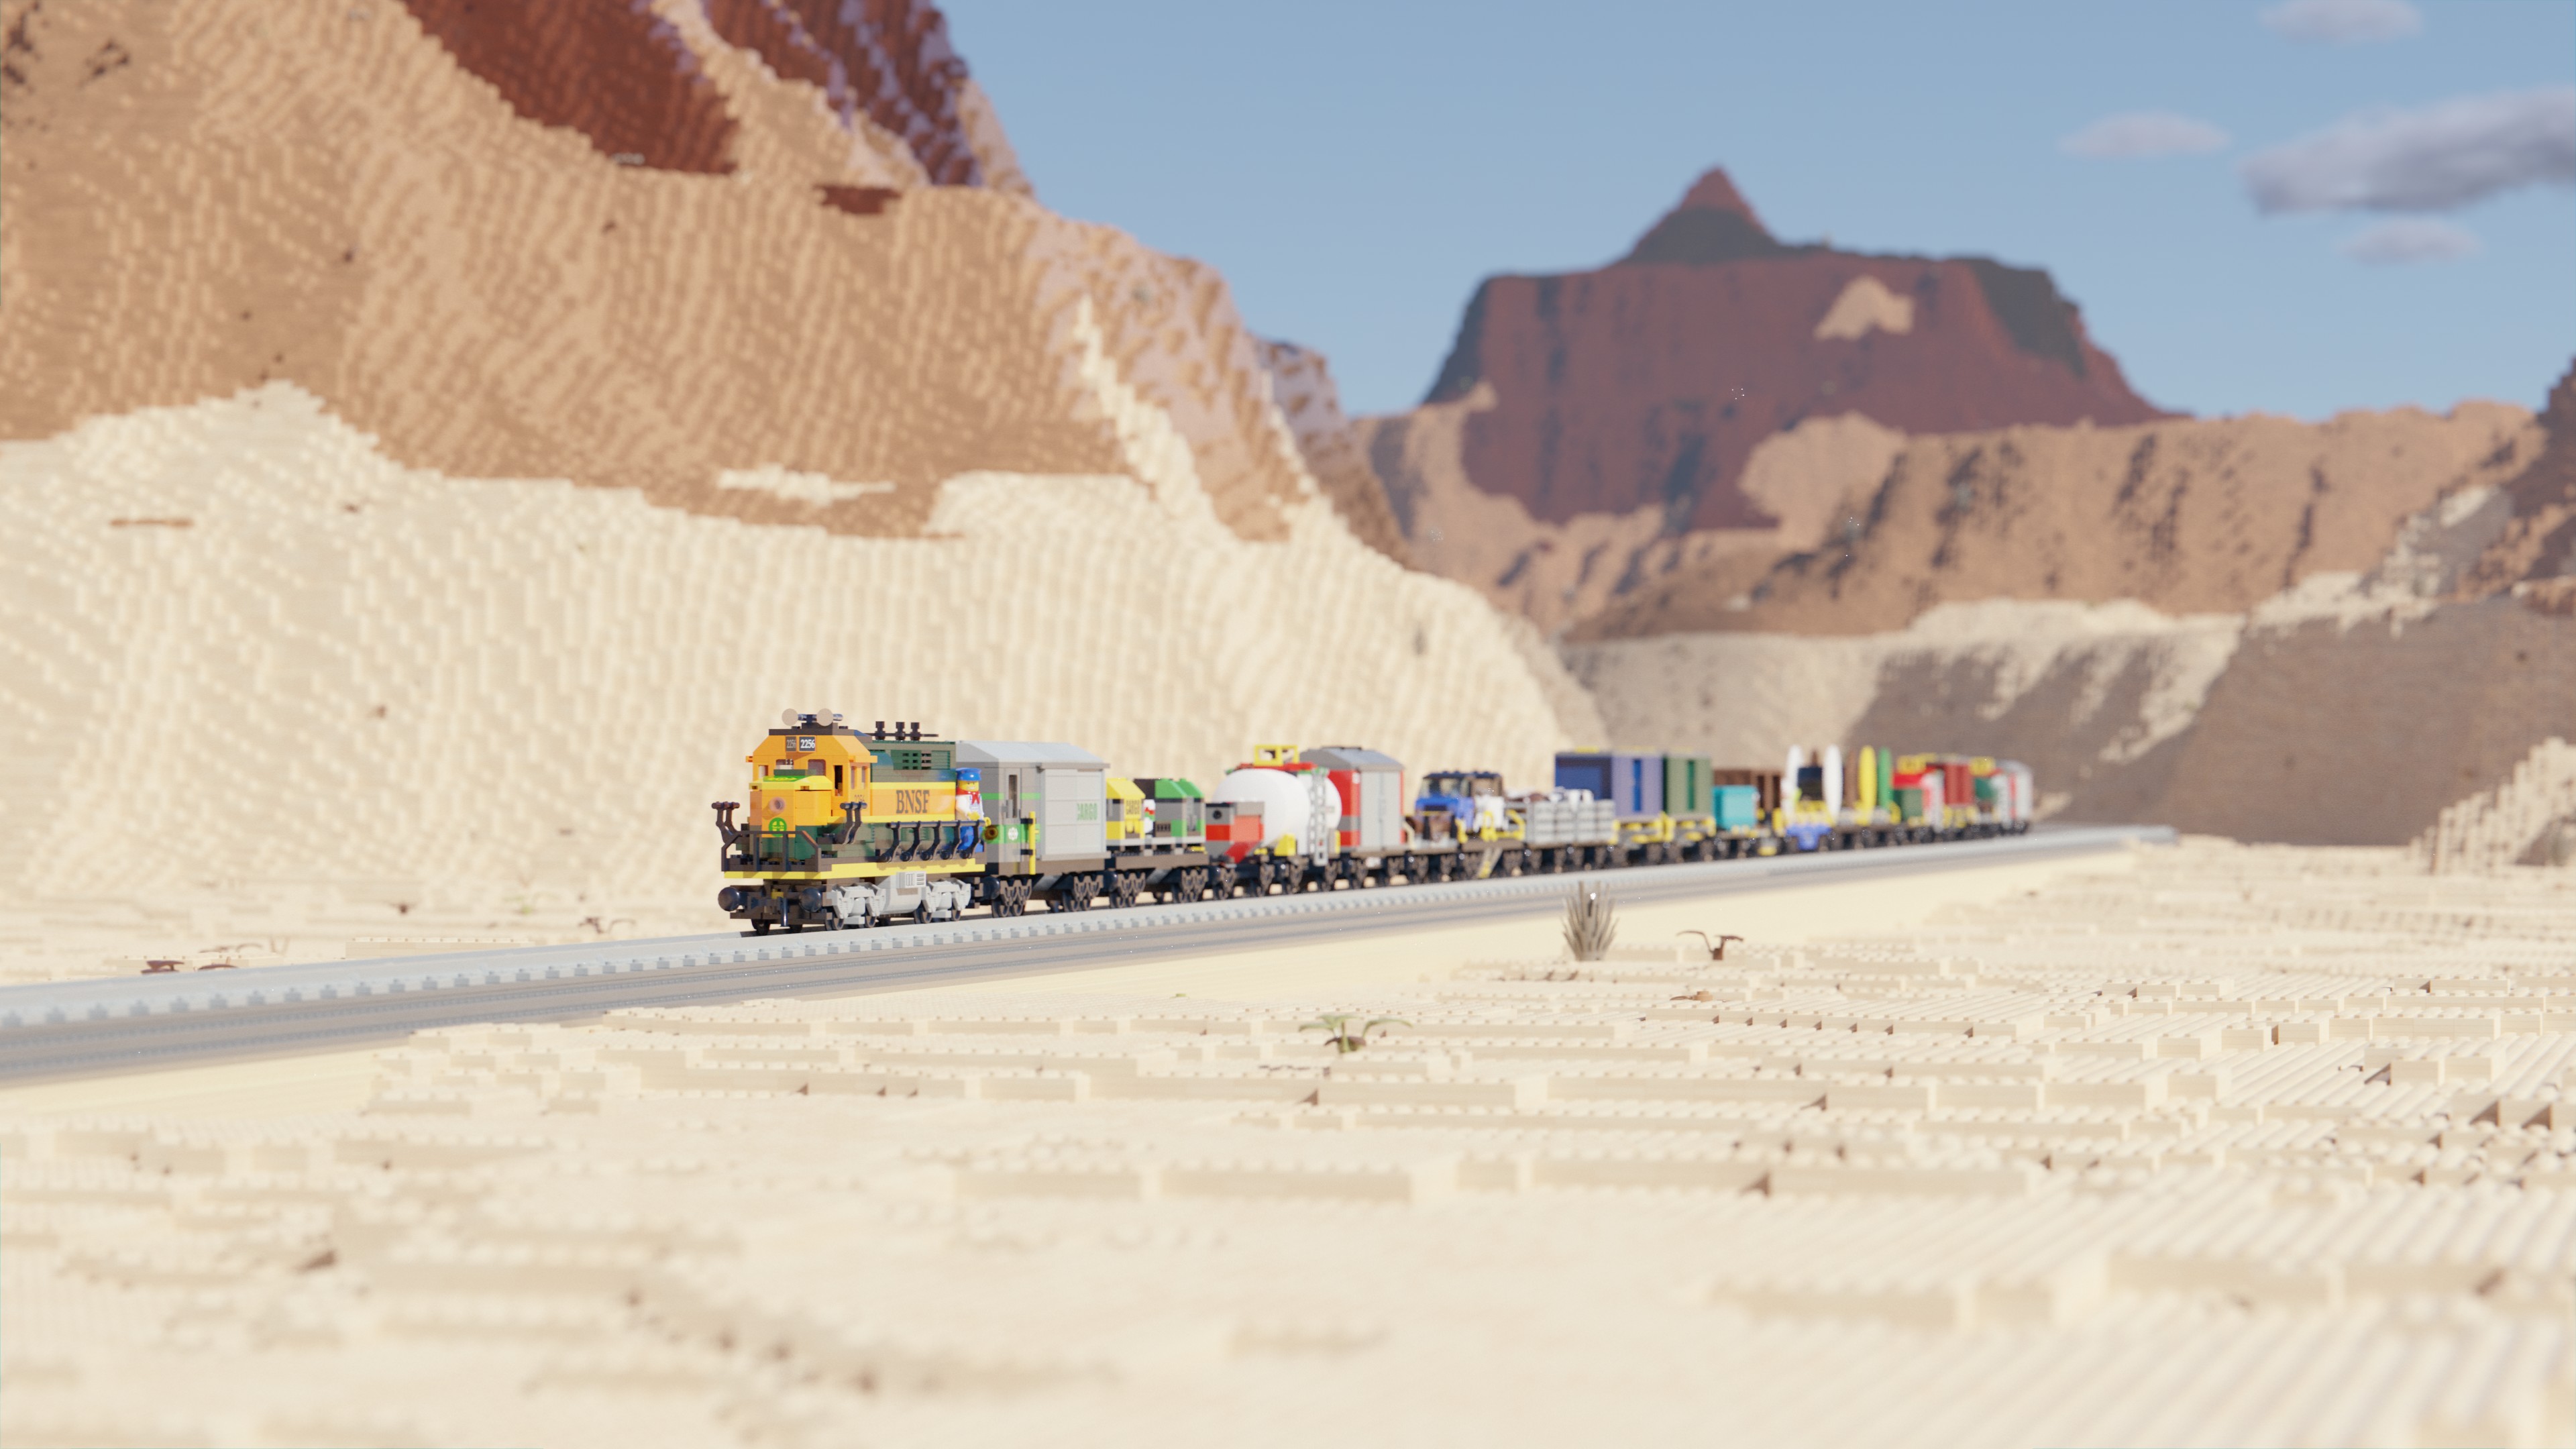 Image of a Lego train travelling through a desert landscape on a sunny day with some clouds in the sky.